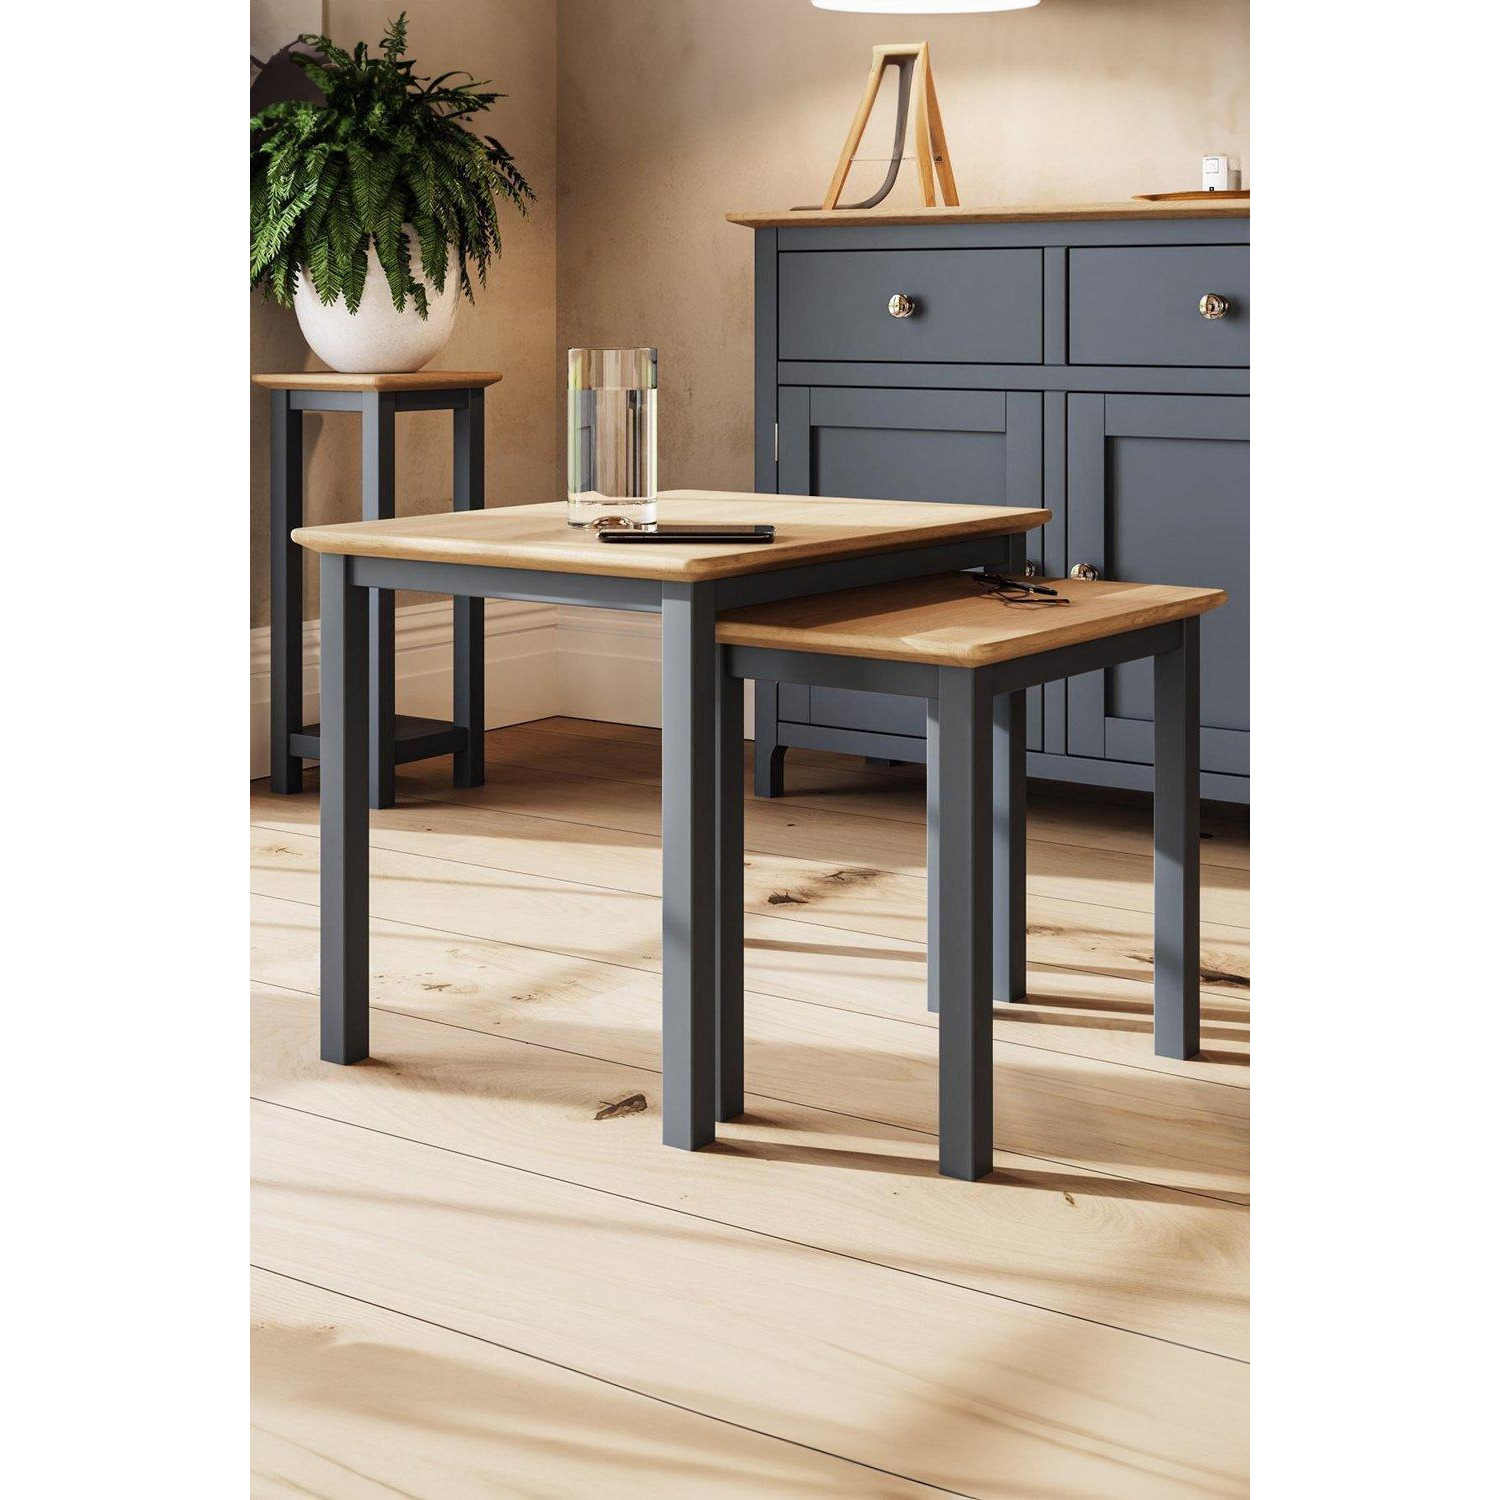 Solid Oak Nest Of 2 Tables Graphite Blue Ready Assembled - image 1